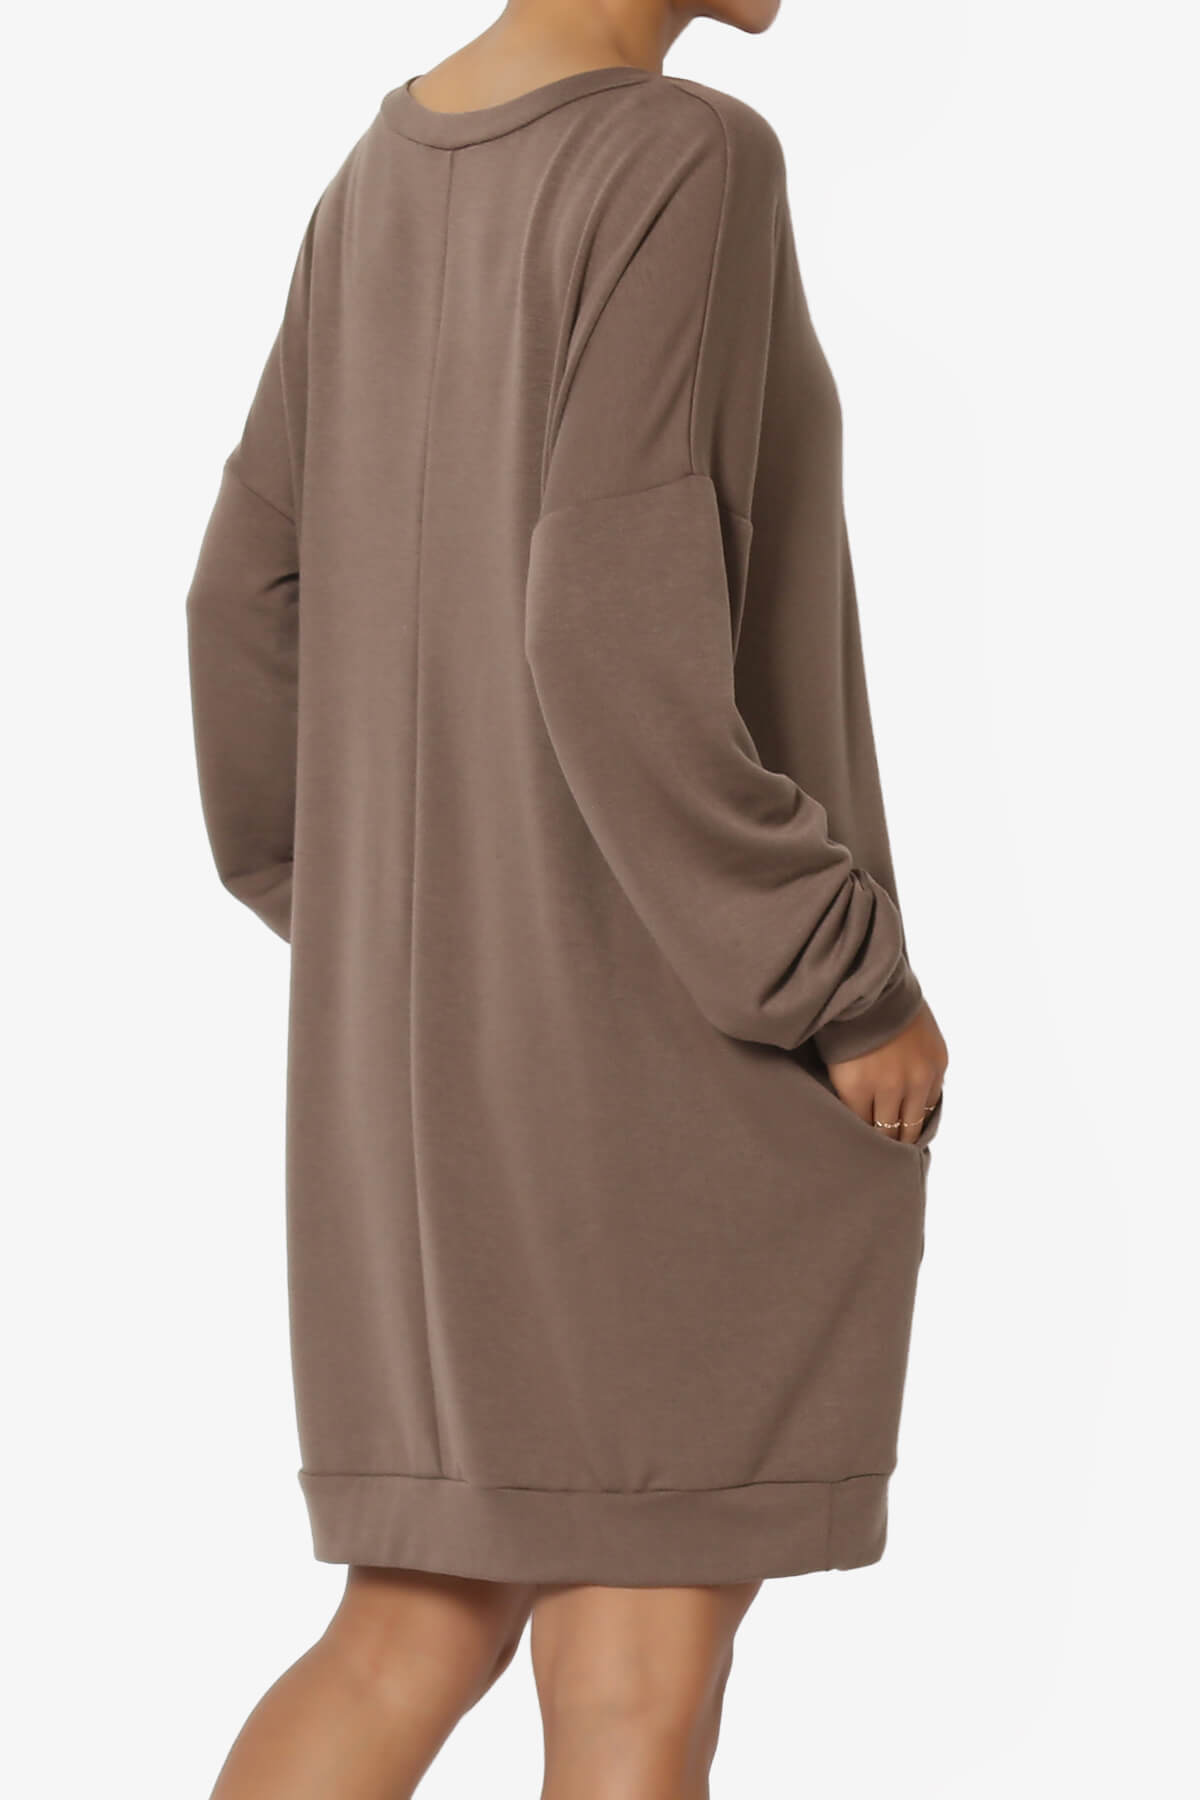 Load image into Gallery viewer, Chrissy V-Neck Pocket Soft Terry Tunic MOCHA_4
